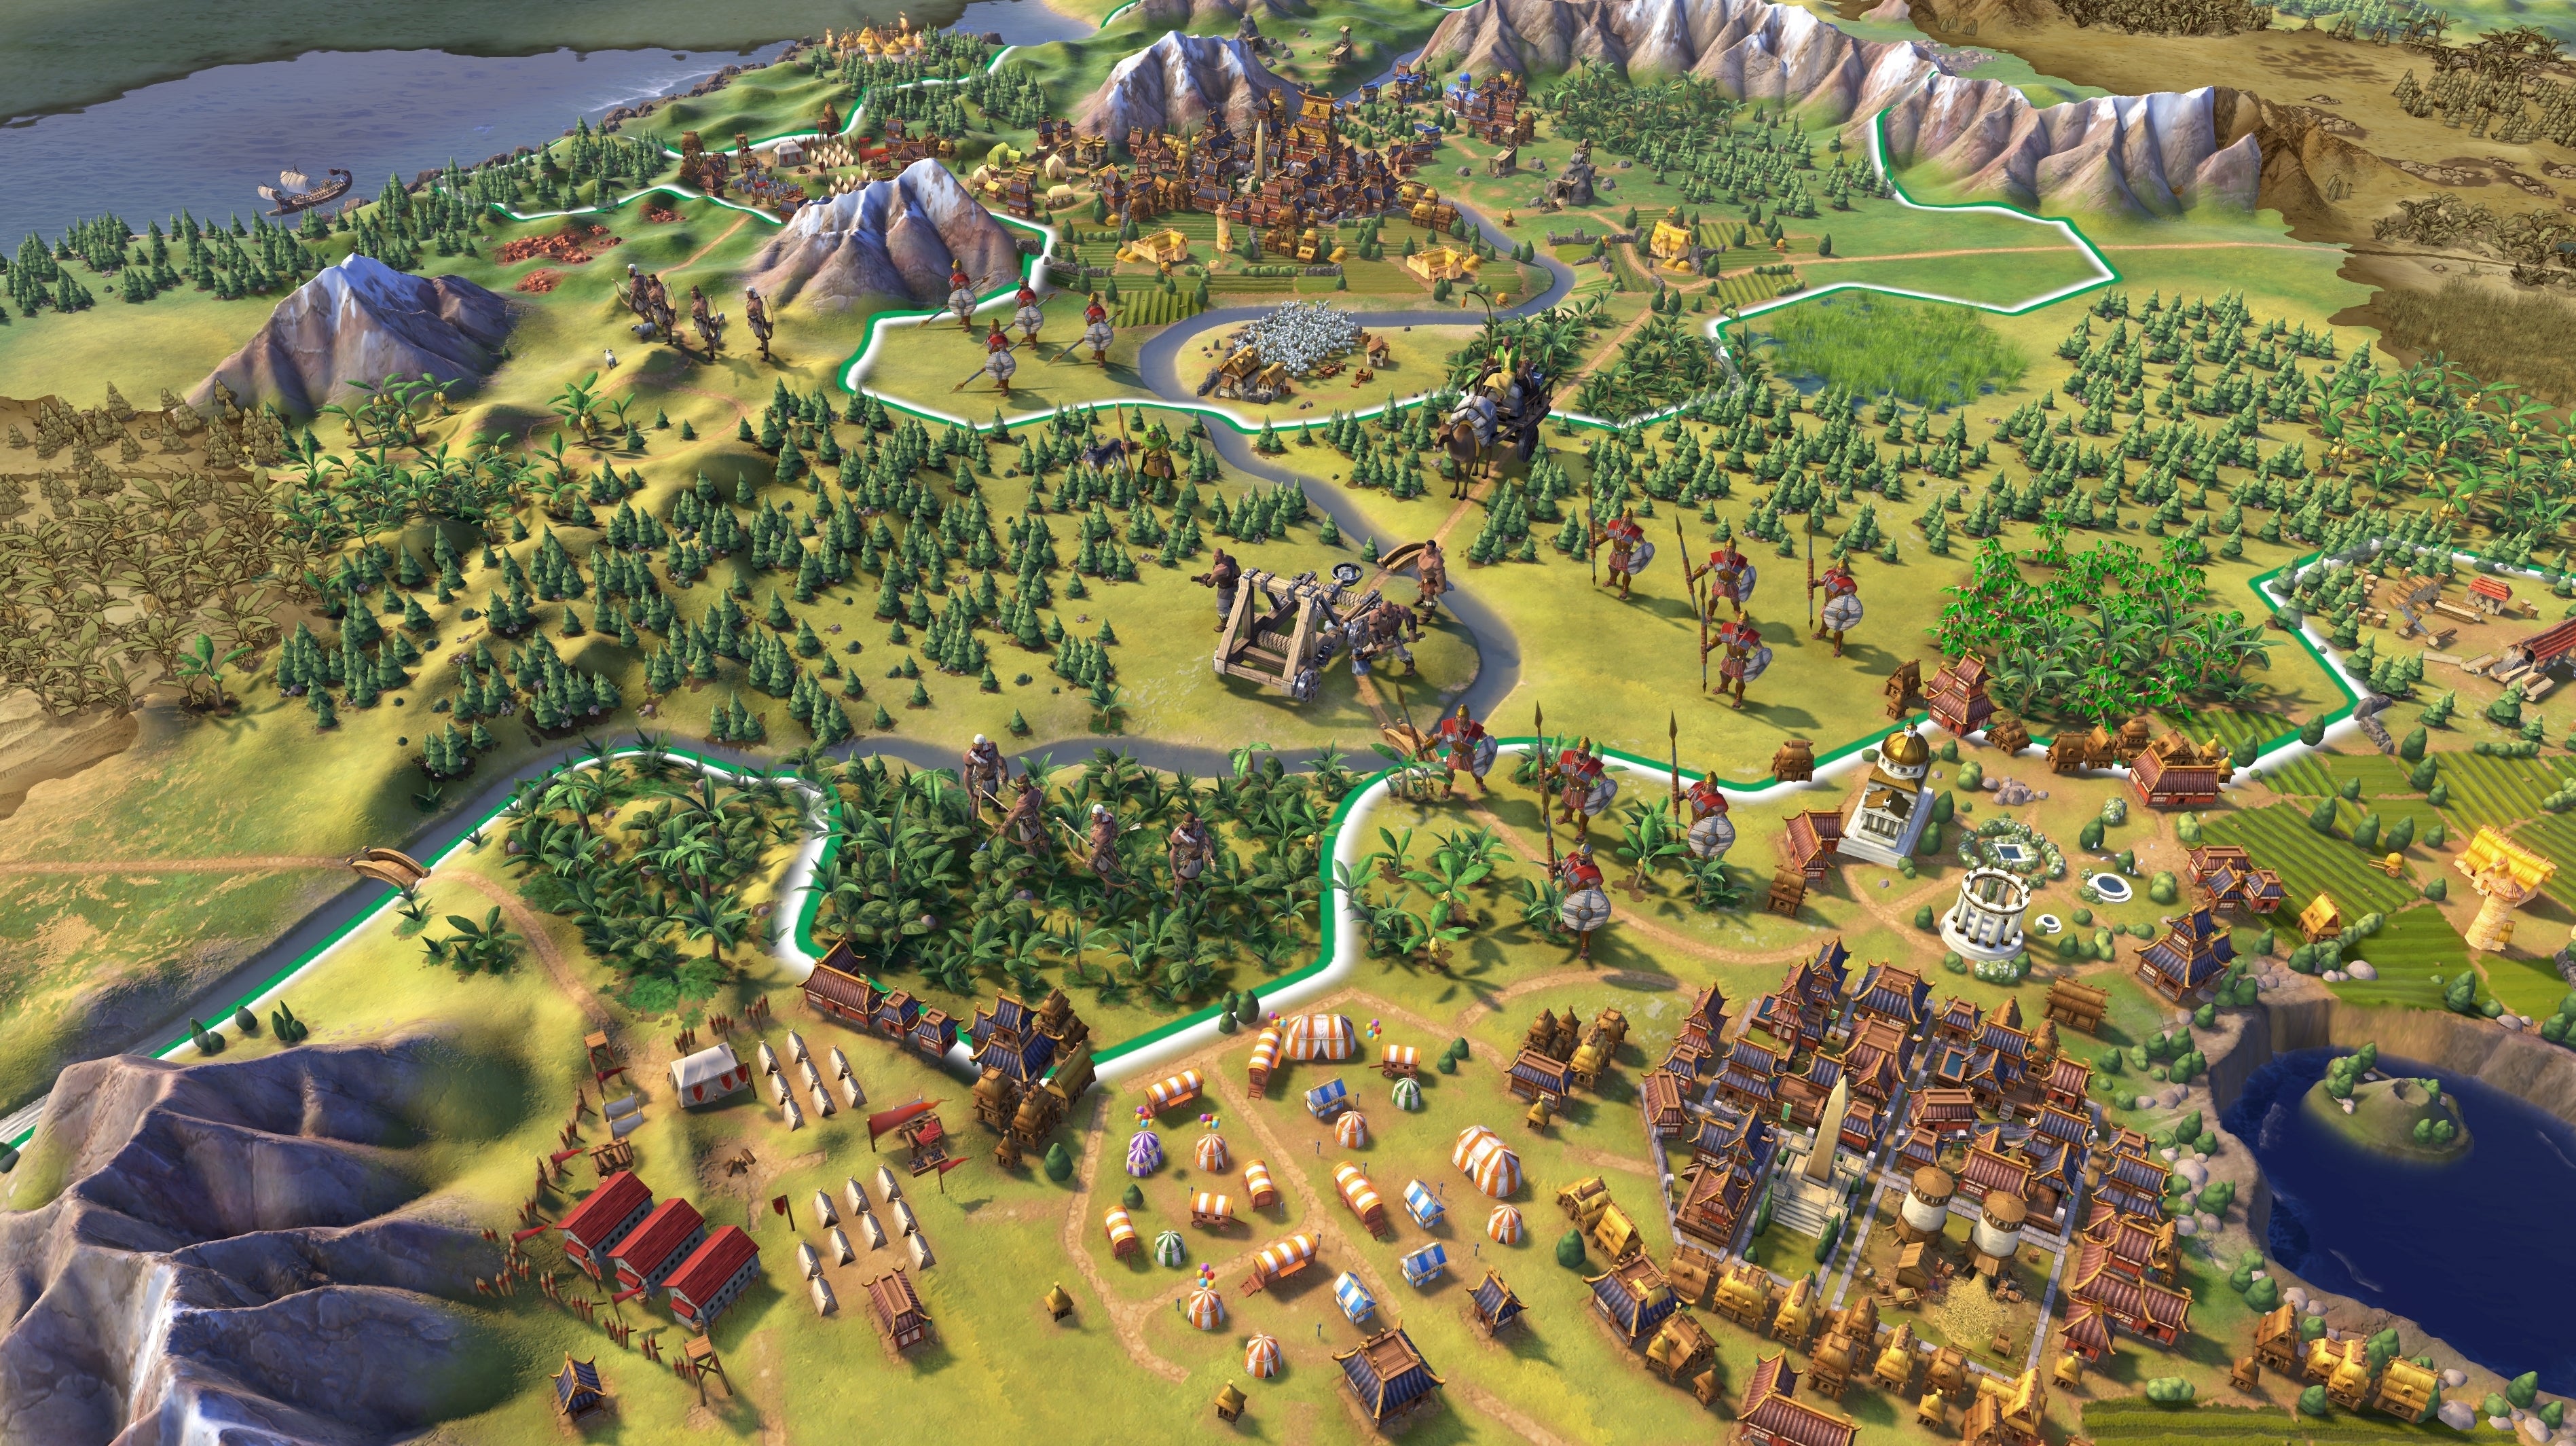 Image for Civilization 6's final free game update adds three new units, two new maps, and more